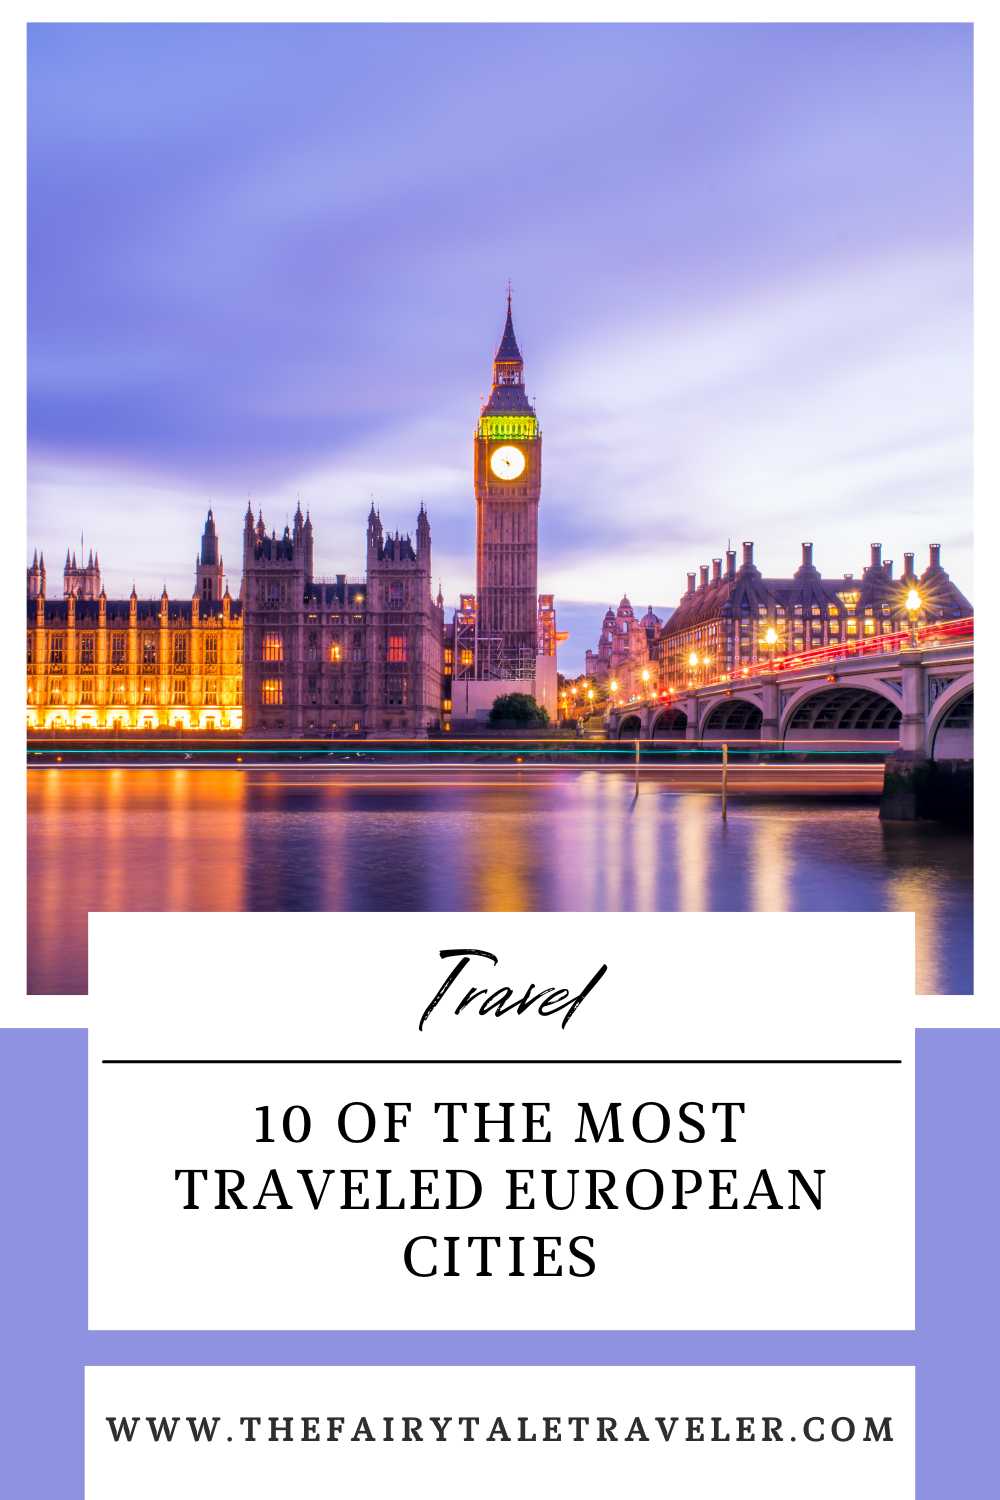 Most Traveled European Cities, London